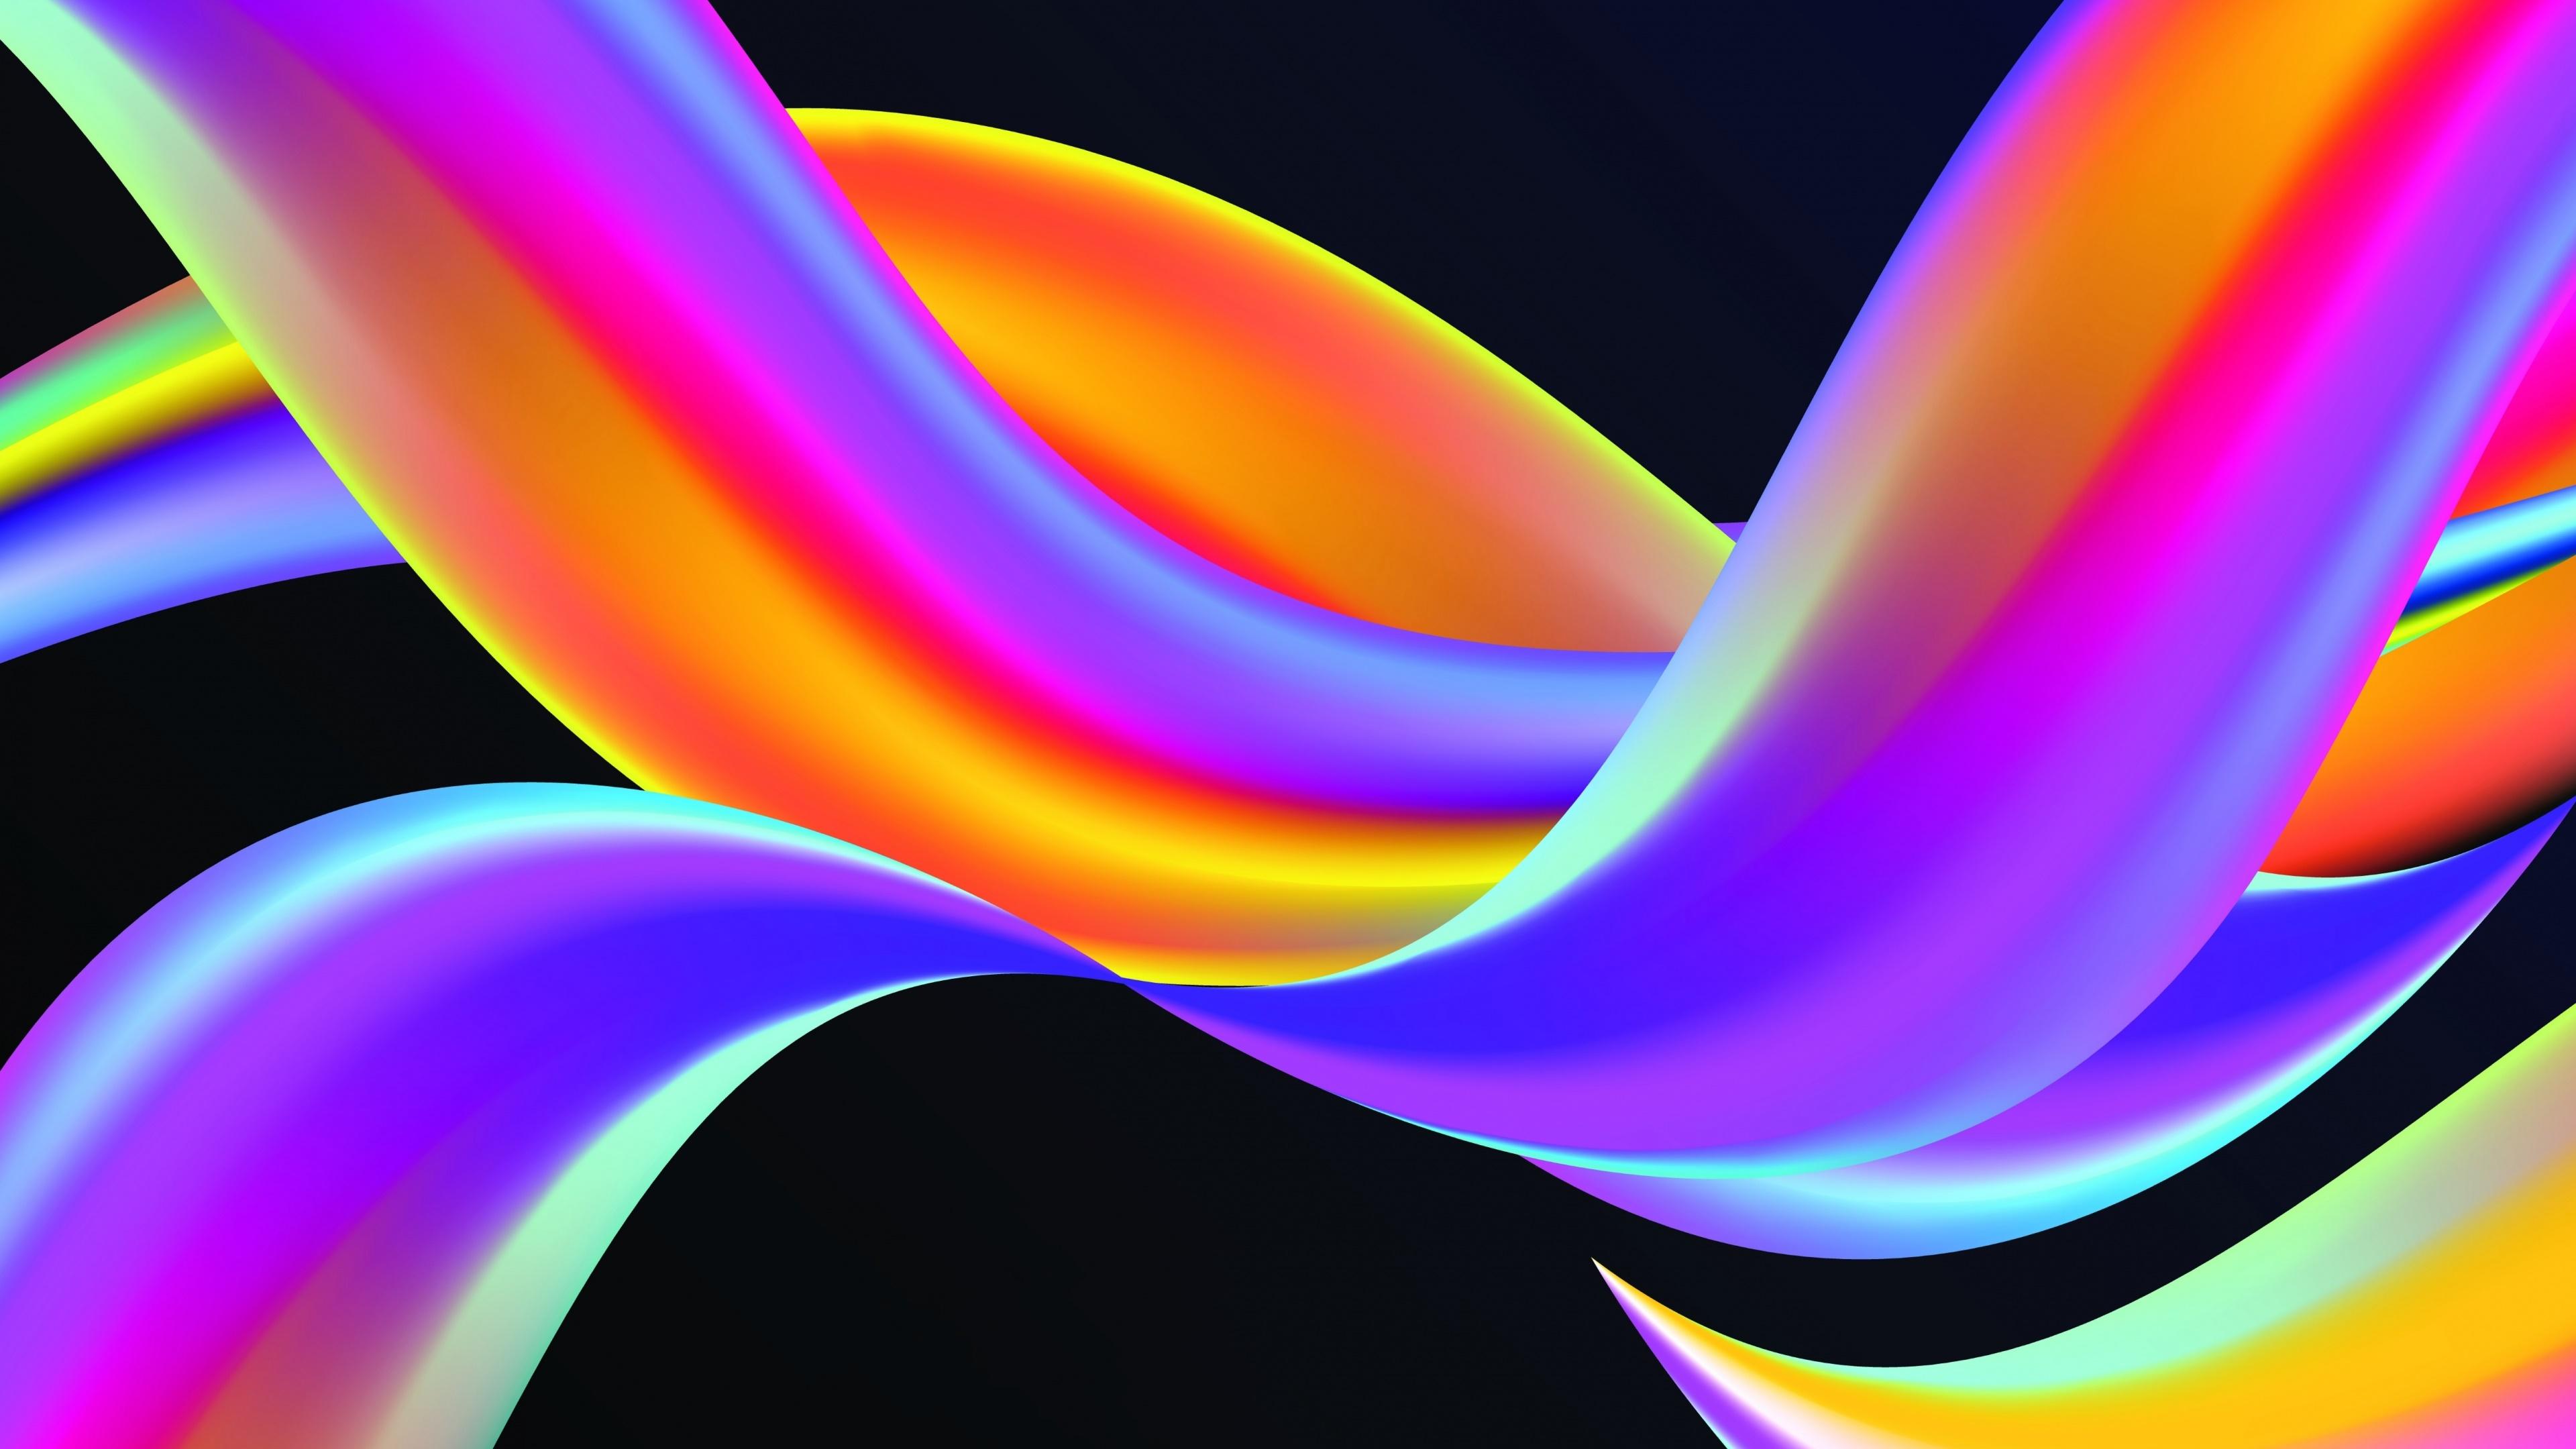 Neon Wave Abstract 4k Ultra HD Wallpaper. Background Image